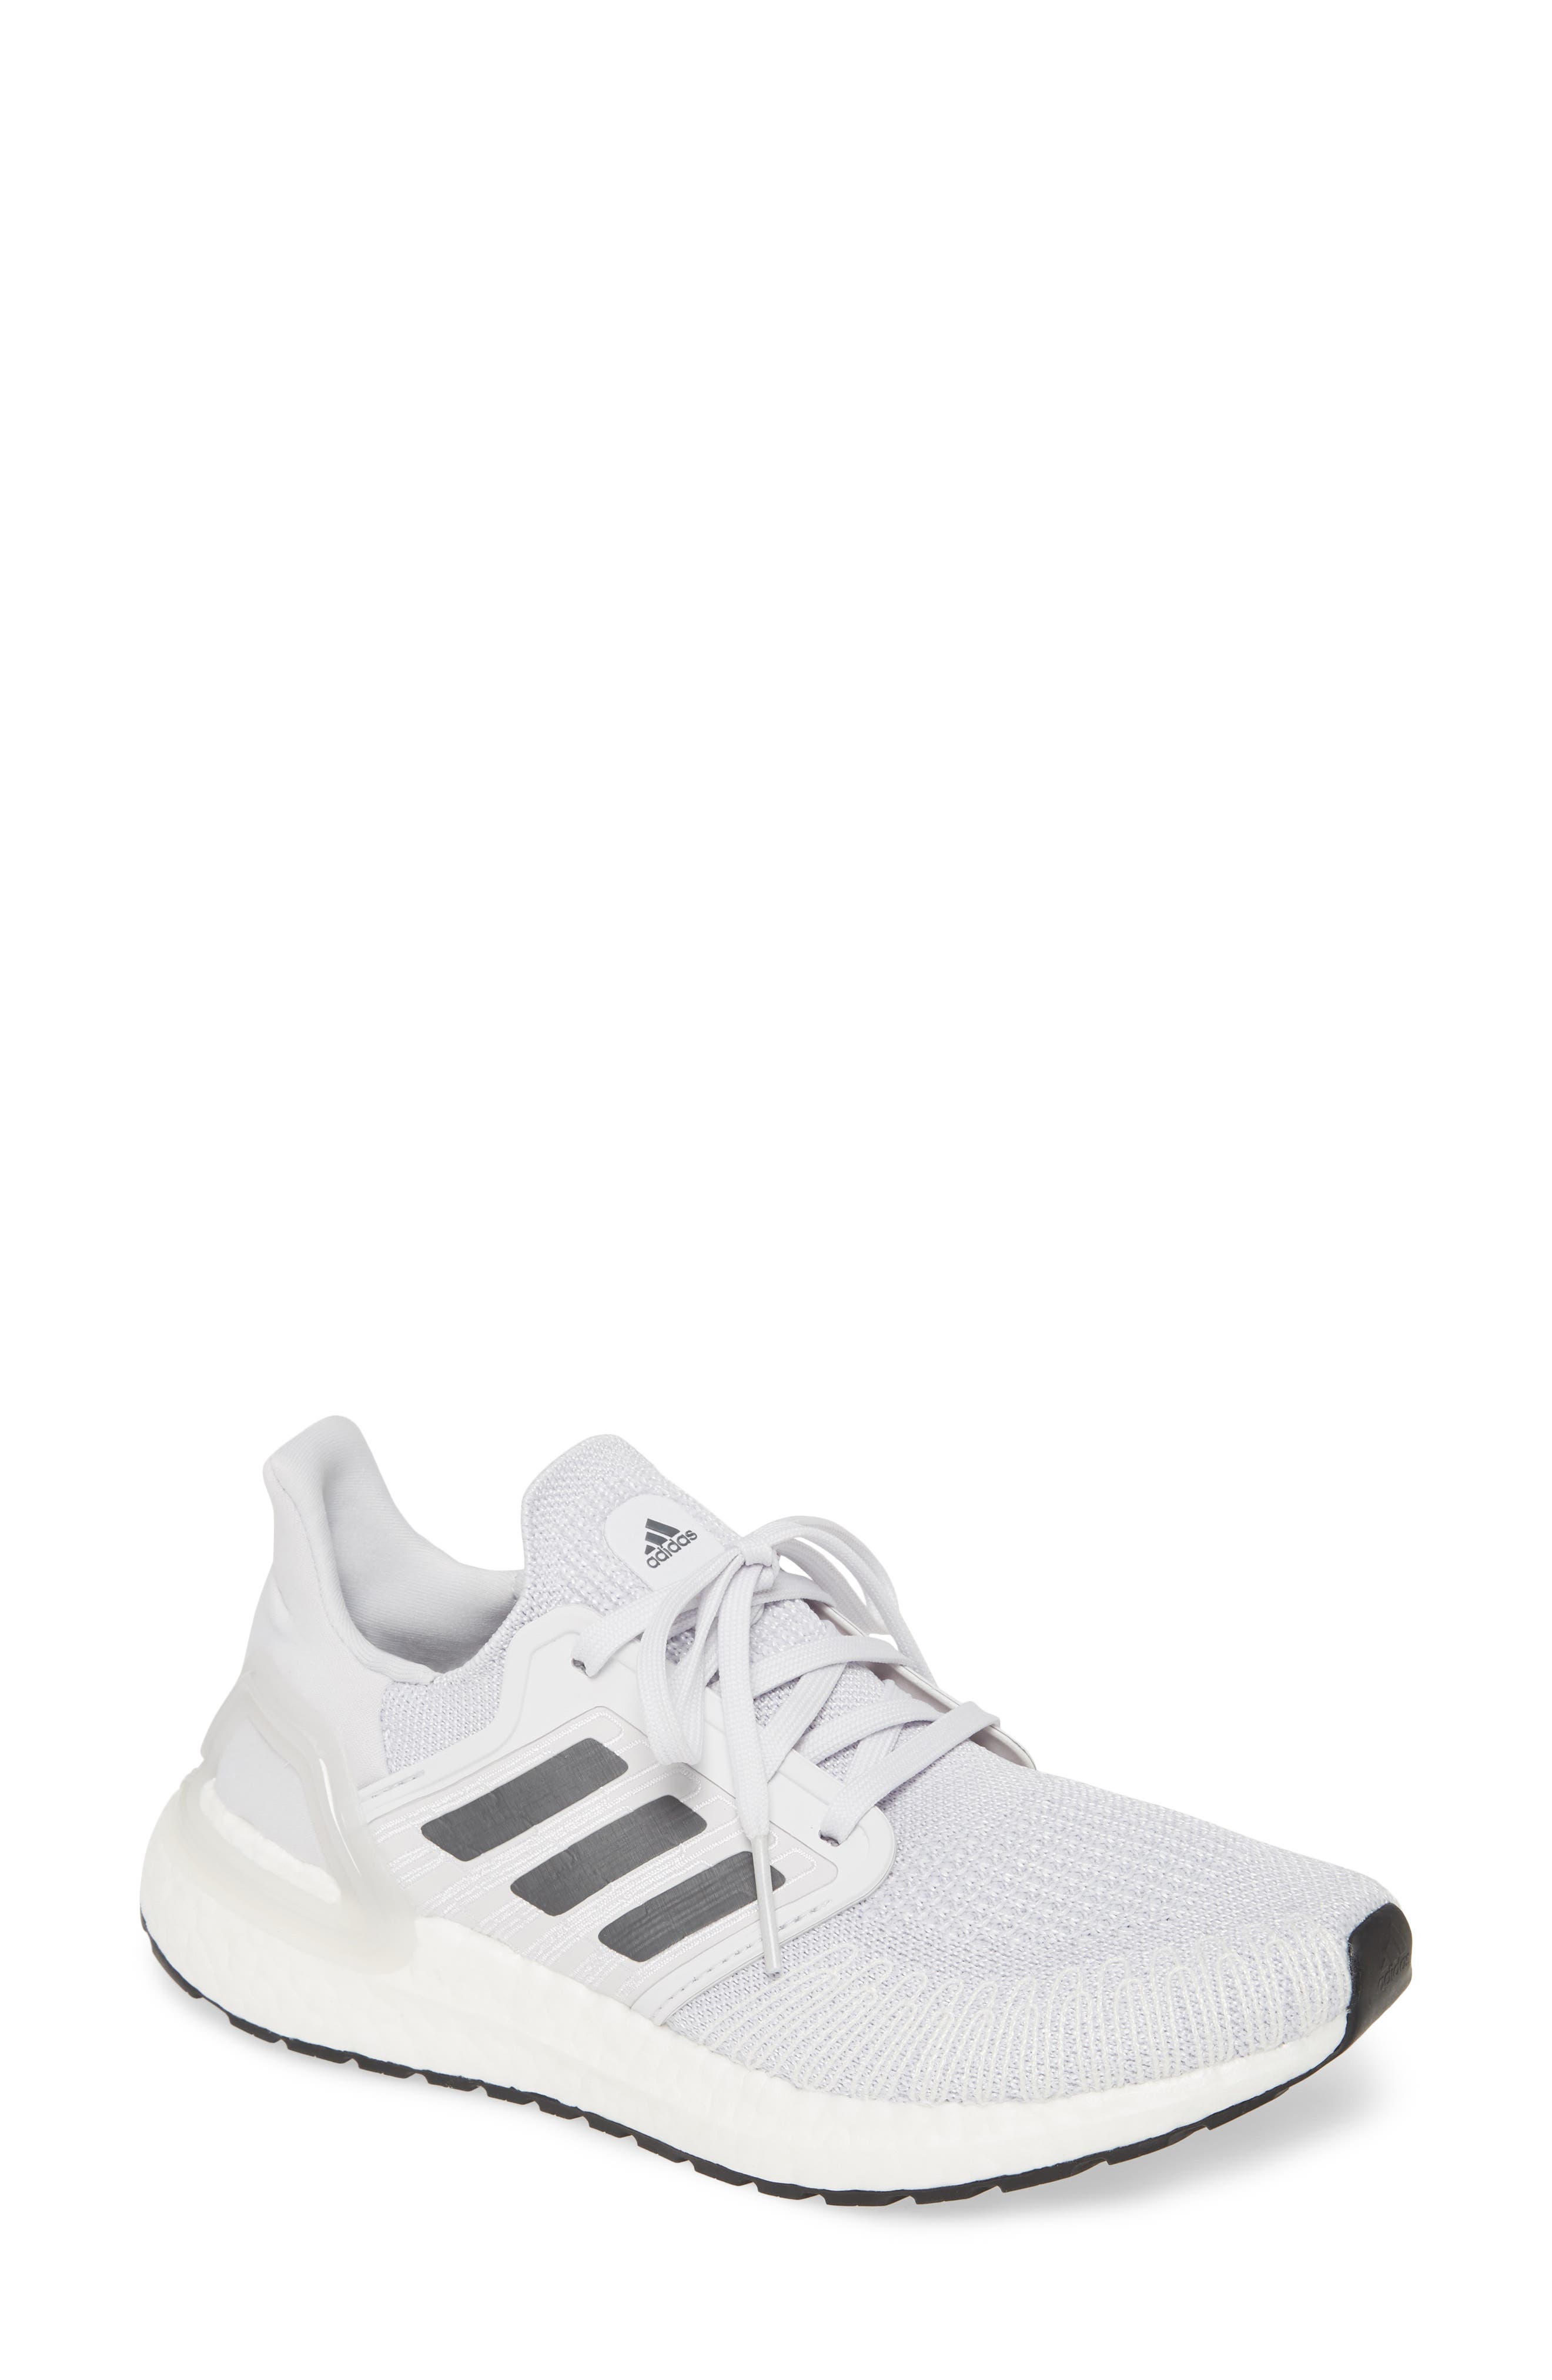 adidas sneakers clearance